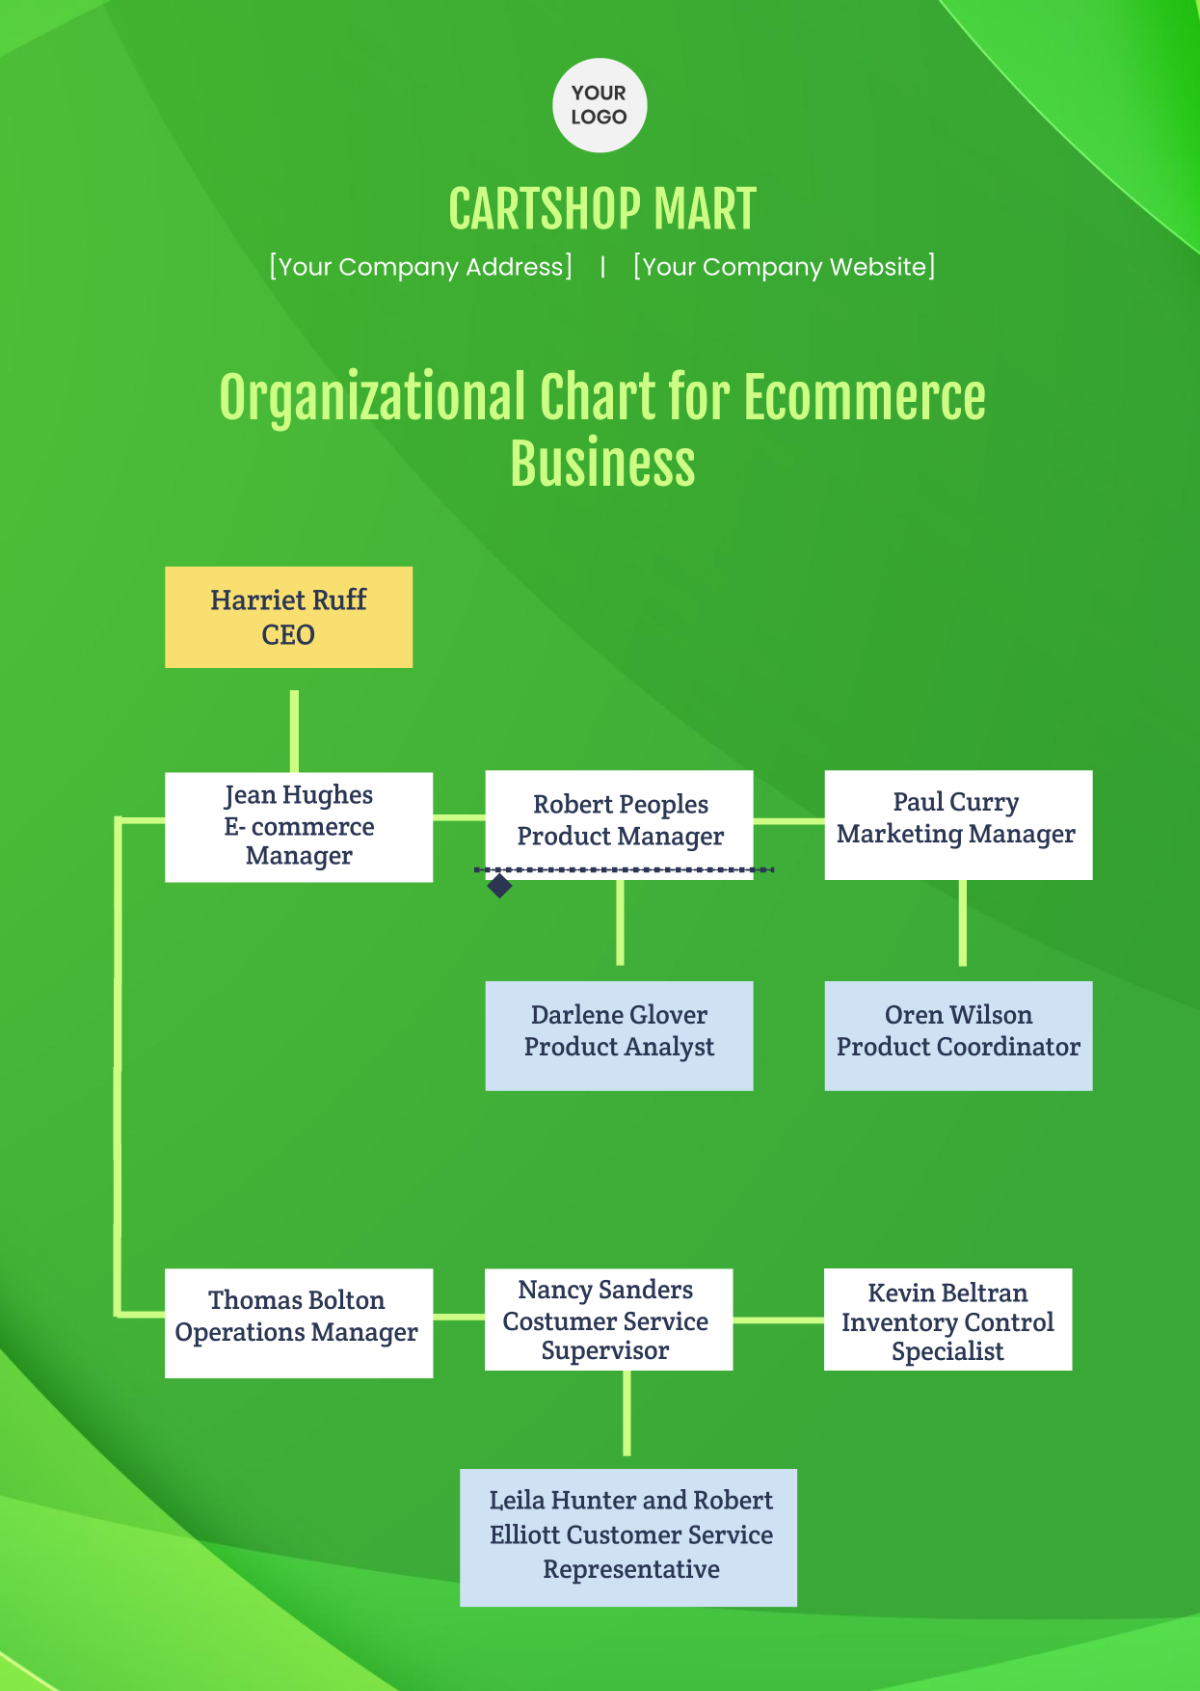 Free Organizational Chart for Ecommerce Business Template